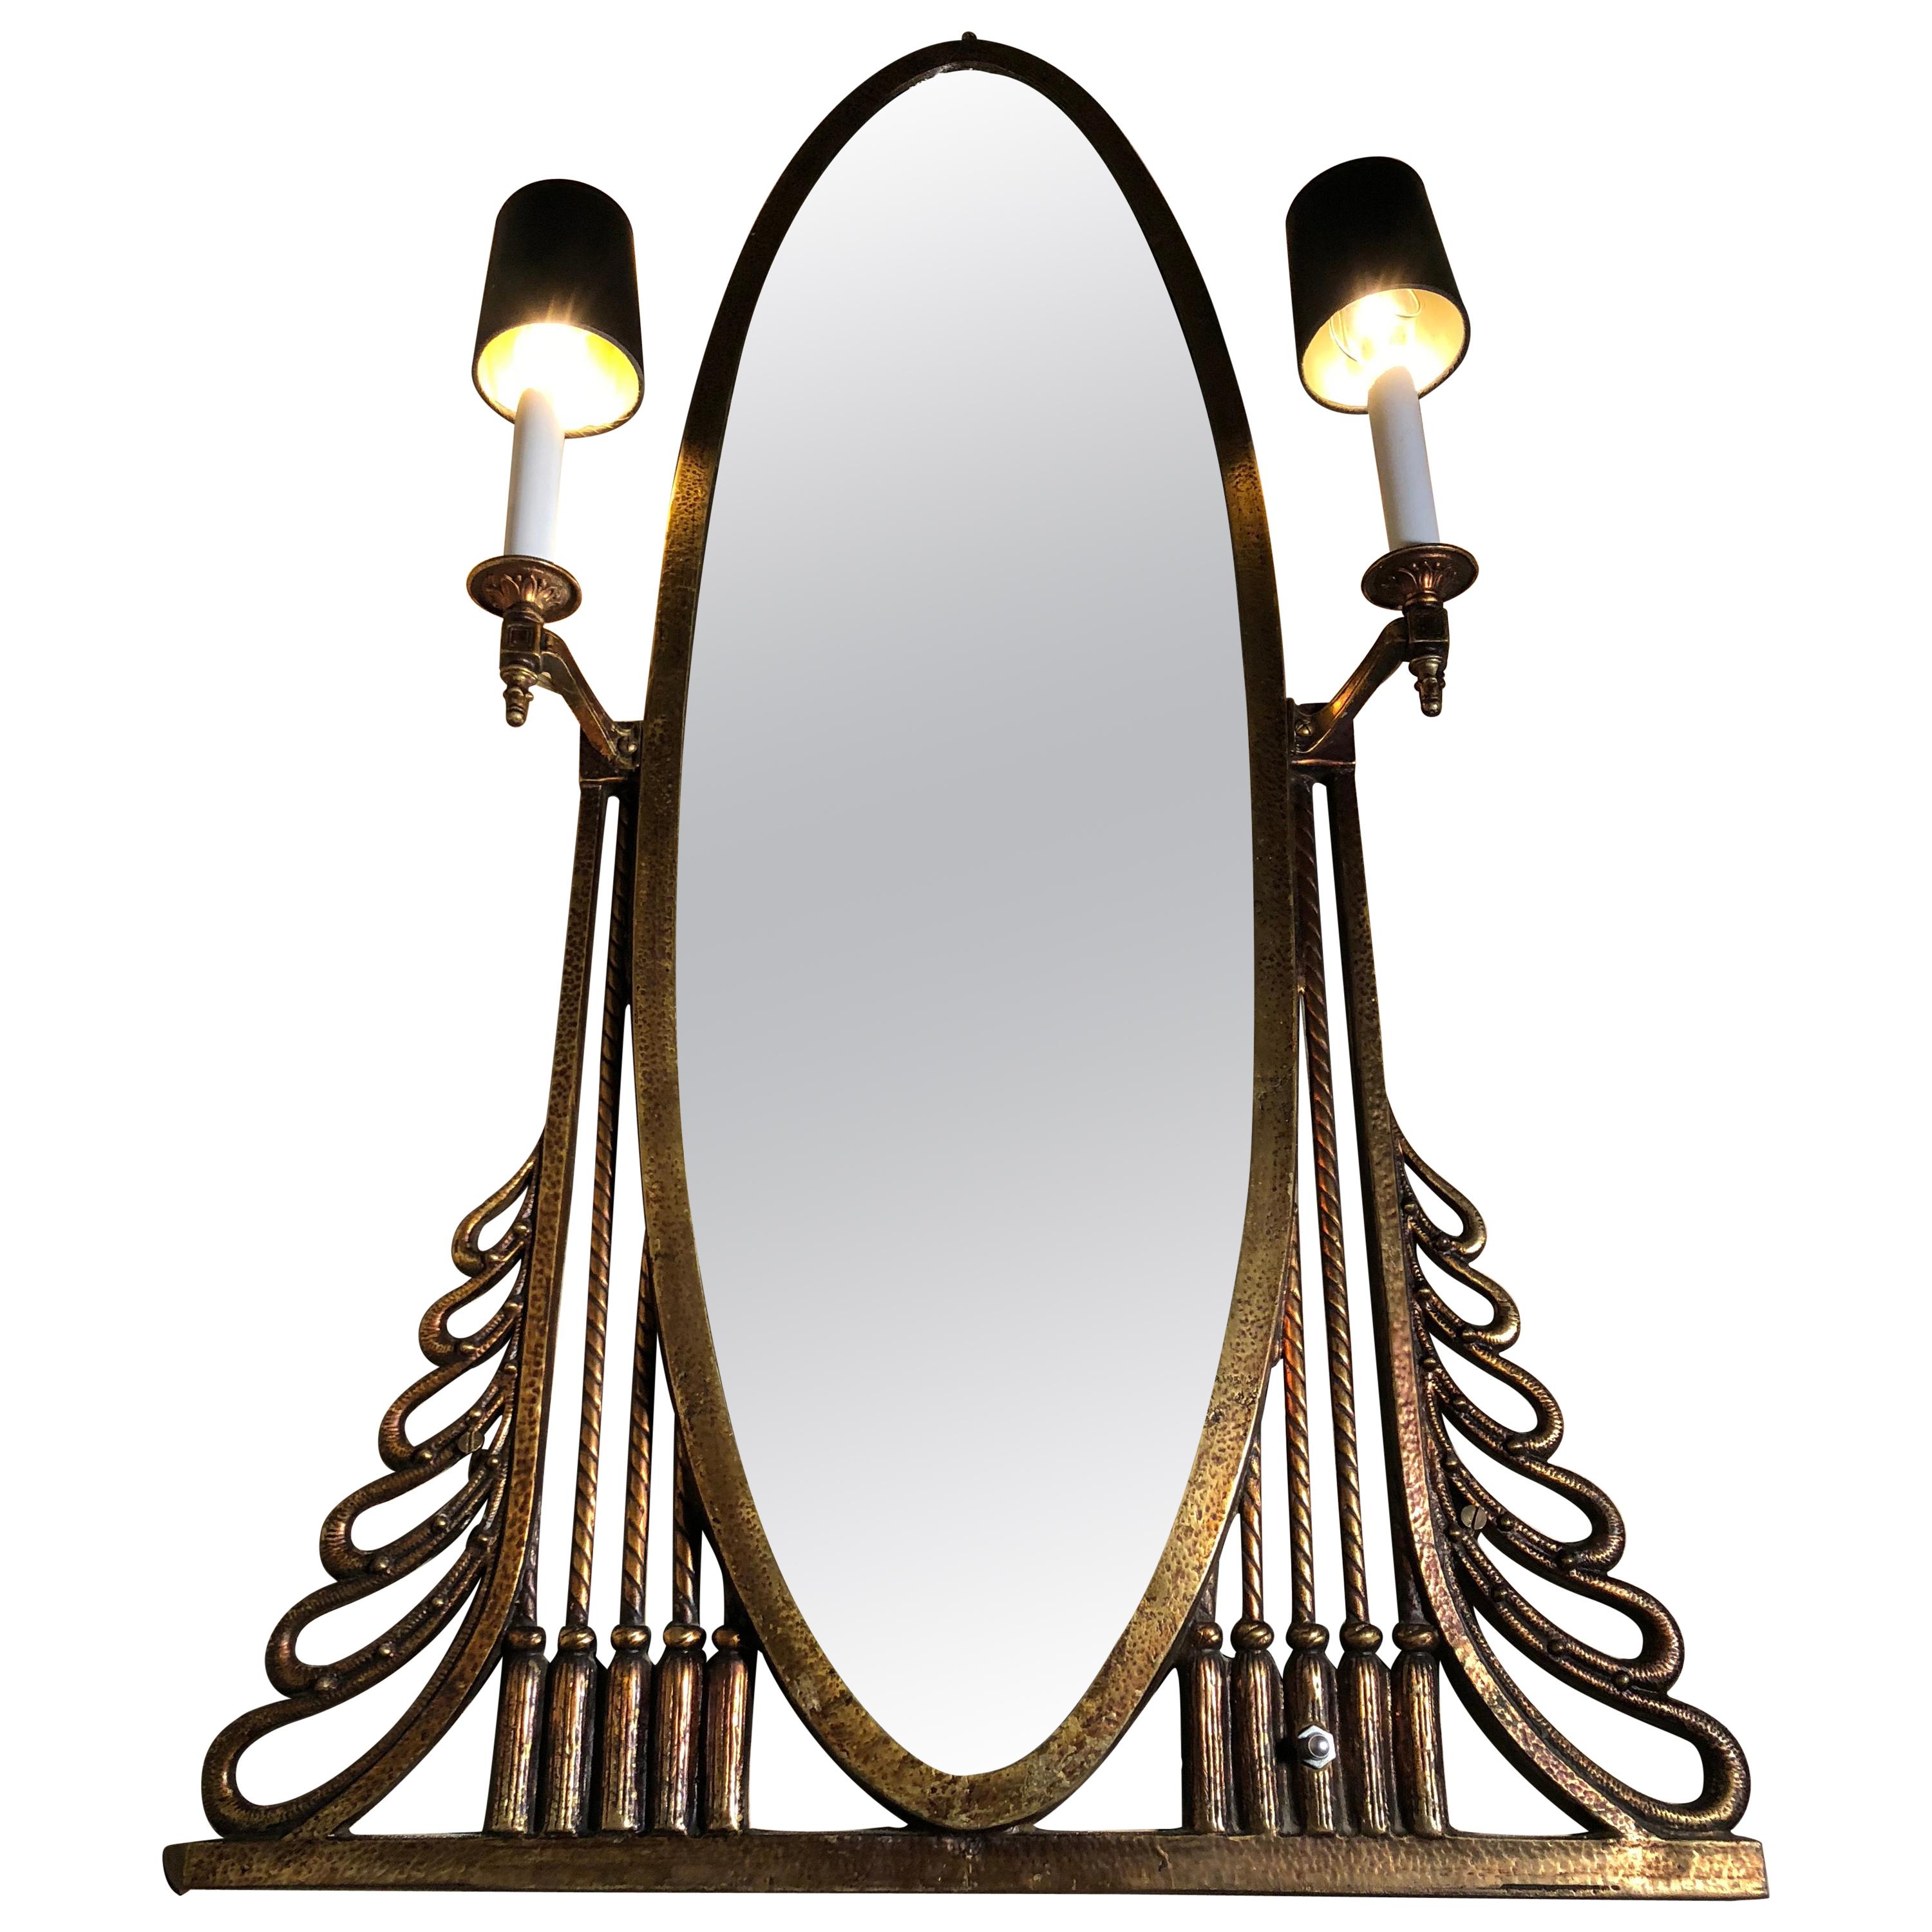 Art Deco Mirror with Sconces, by Oscar Bach, Large Heavy Bronze Art Deco Mirror For Sale